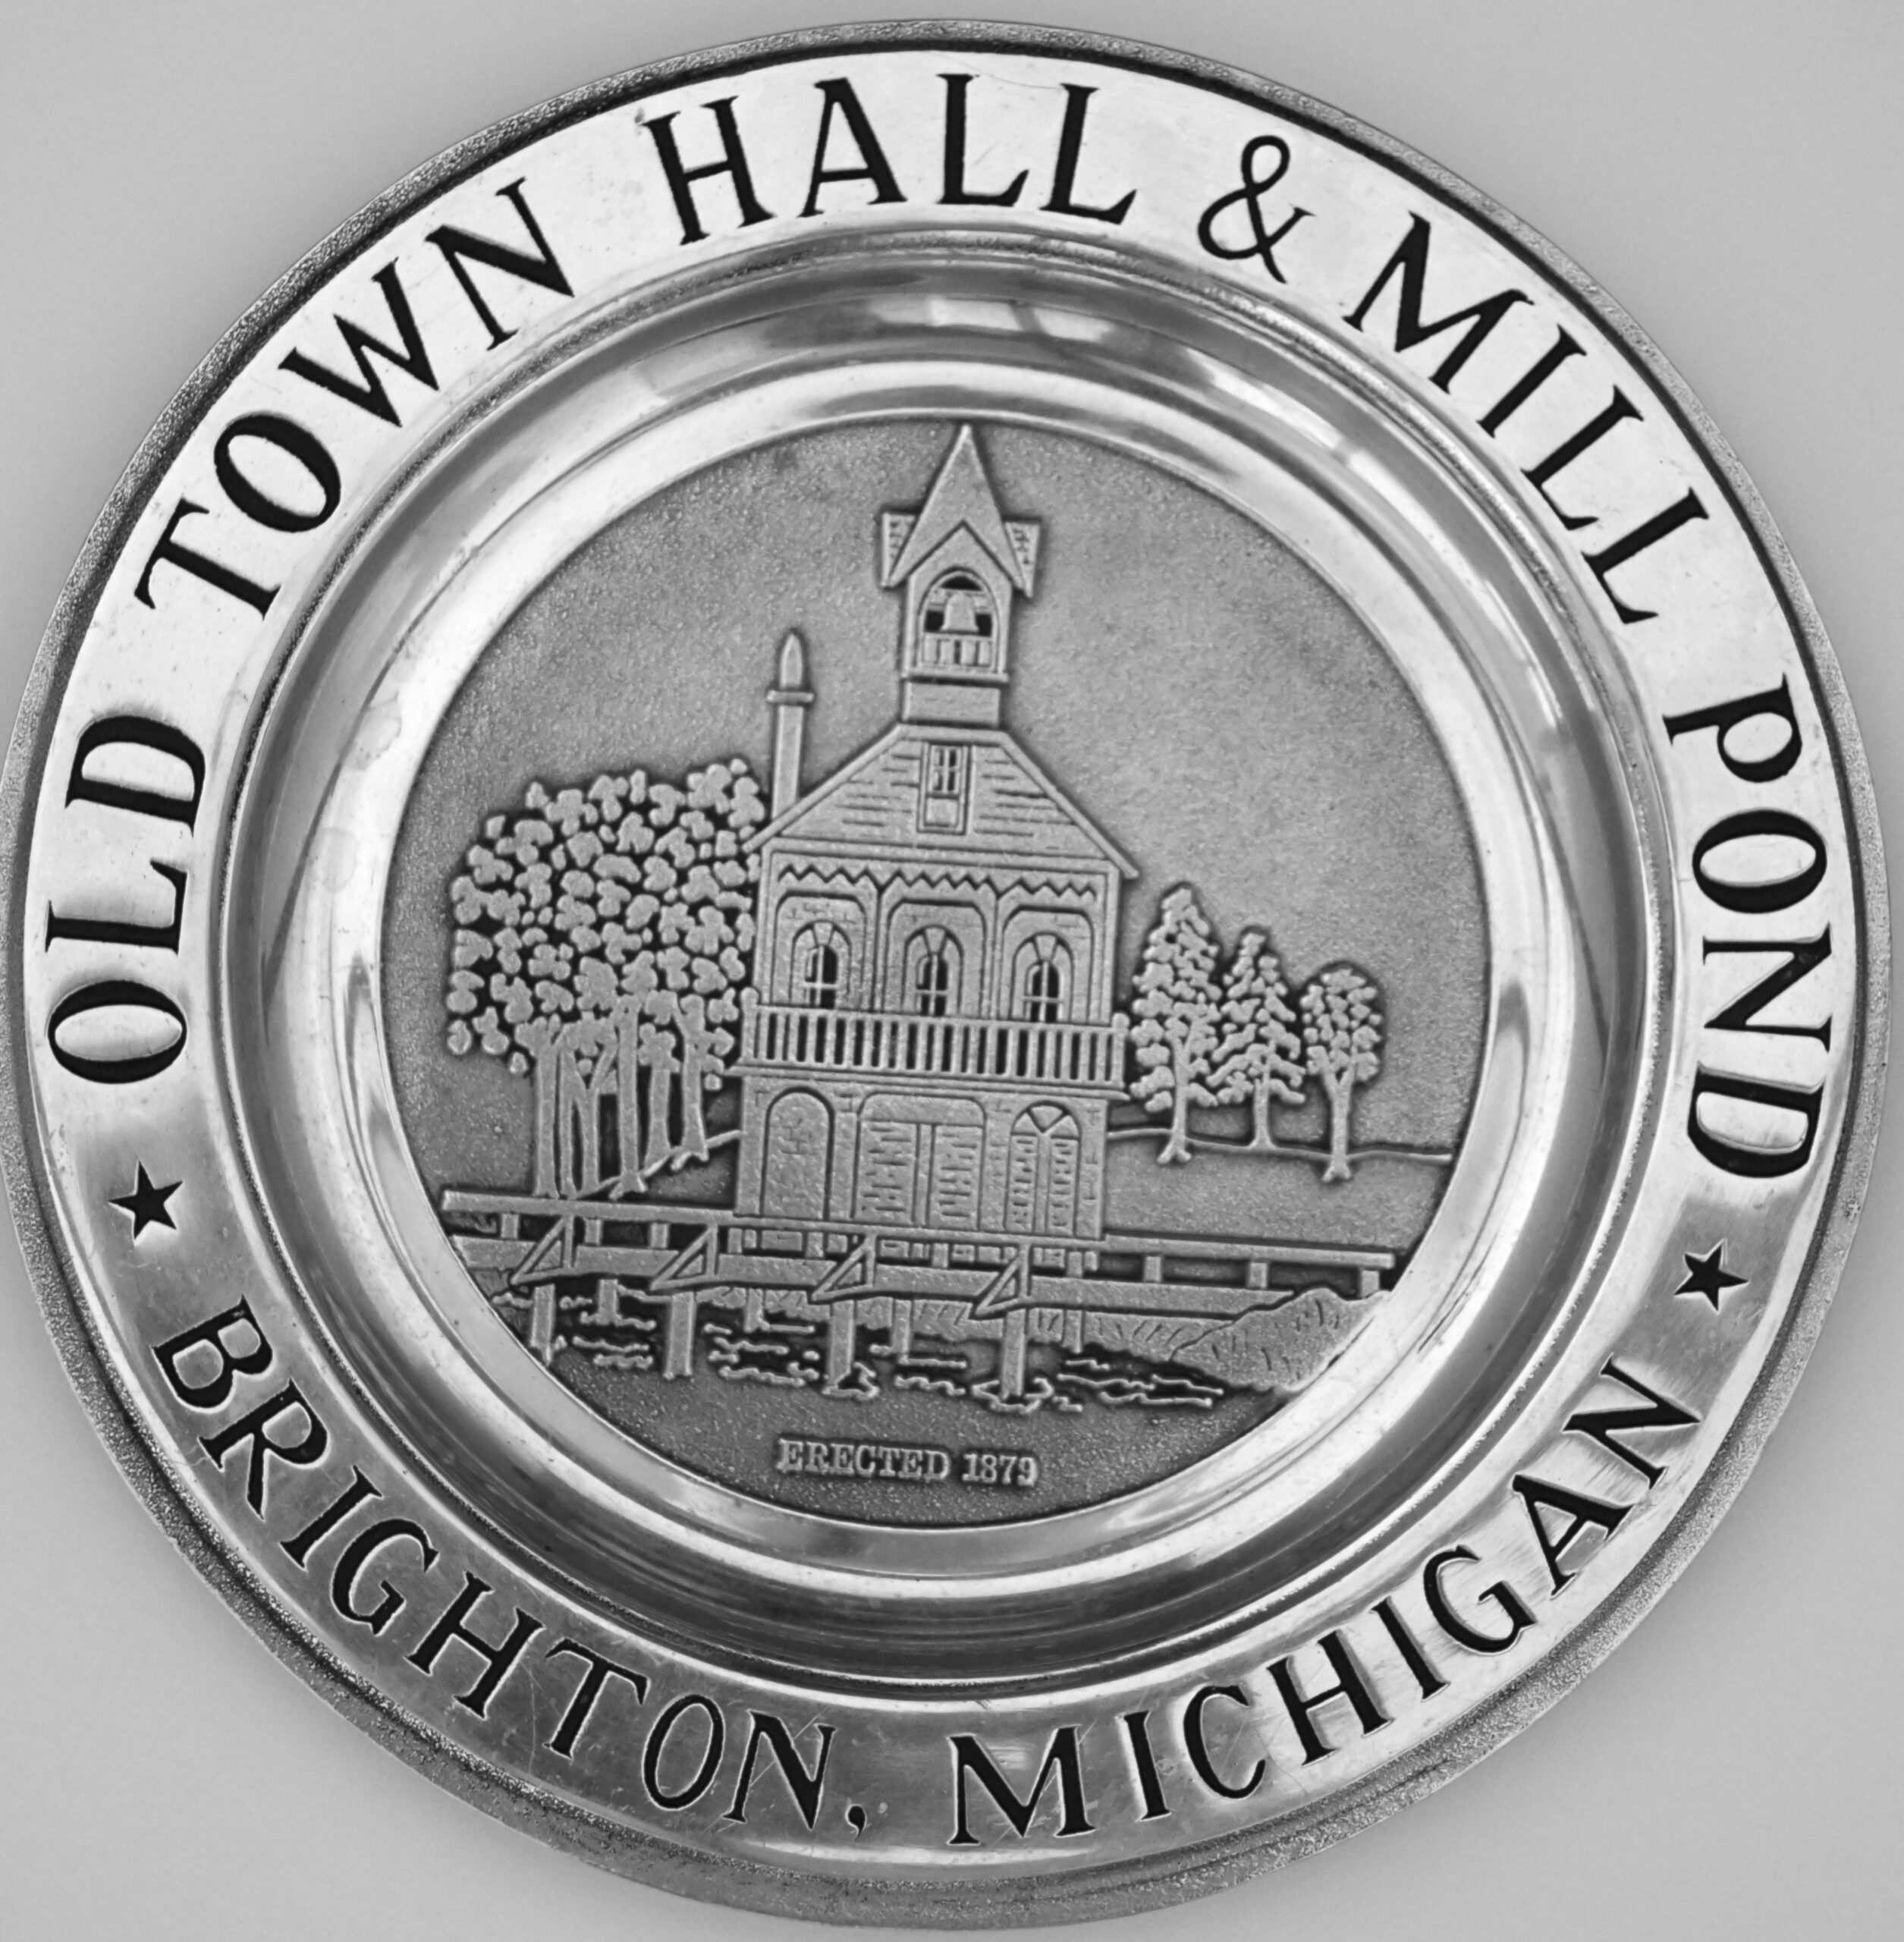 Town Hall Commemorative Pewter Plate